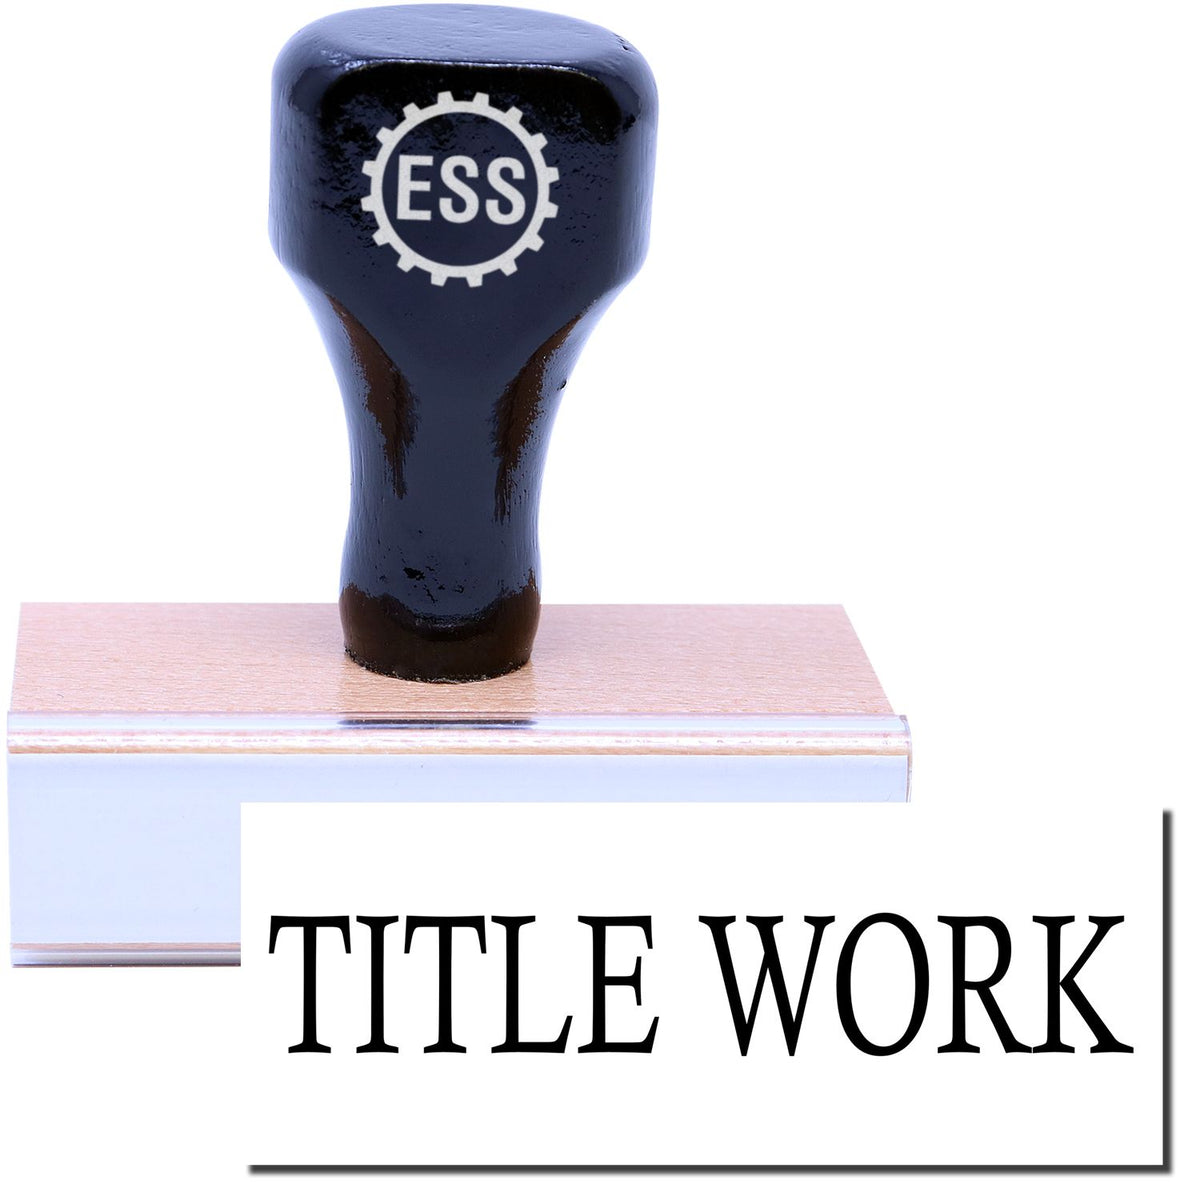 A stock office rubber stamp with a stamped image showing how the text &quot;TITLE WORK&quot; is displayed after stamping.